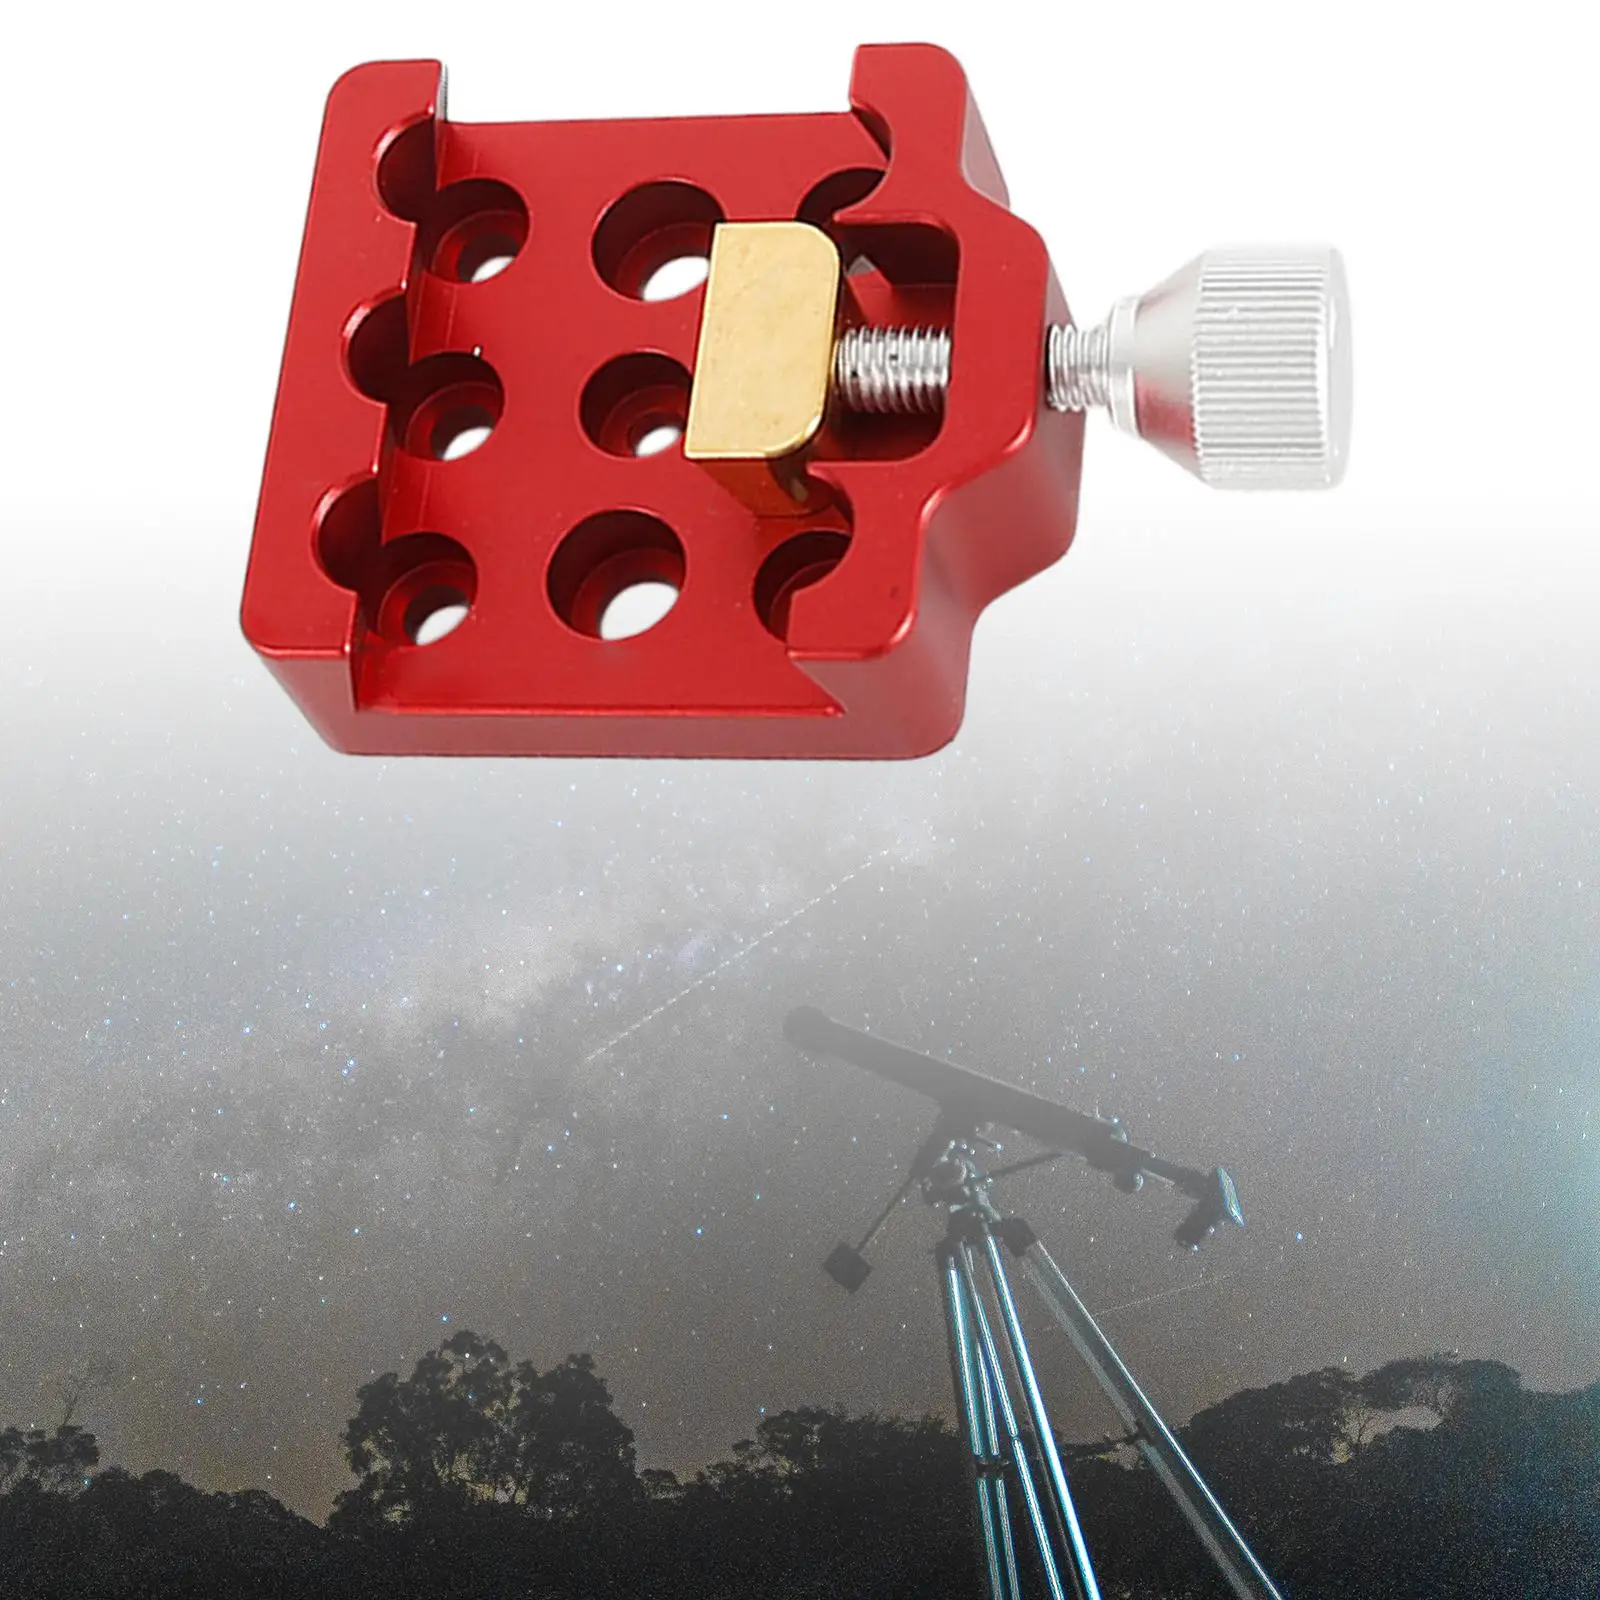 Dovetail Plate Sky Astrophotography Camera Accessories 75 Degrees Universal